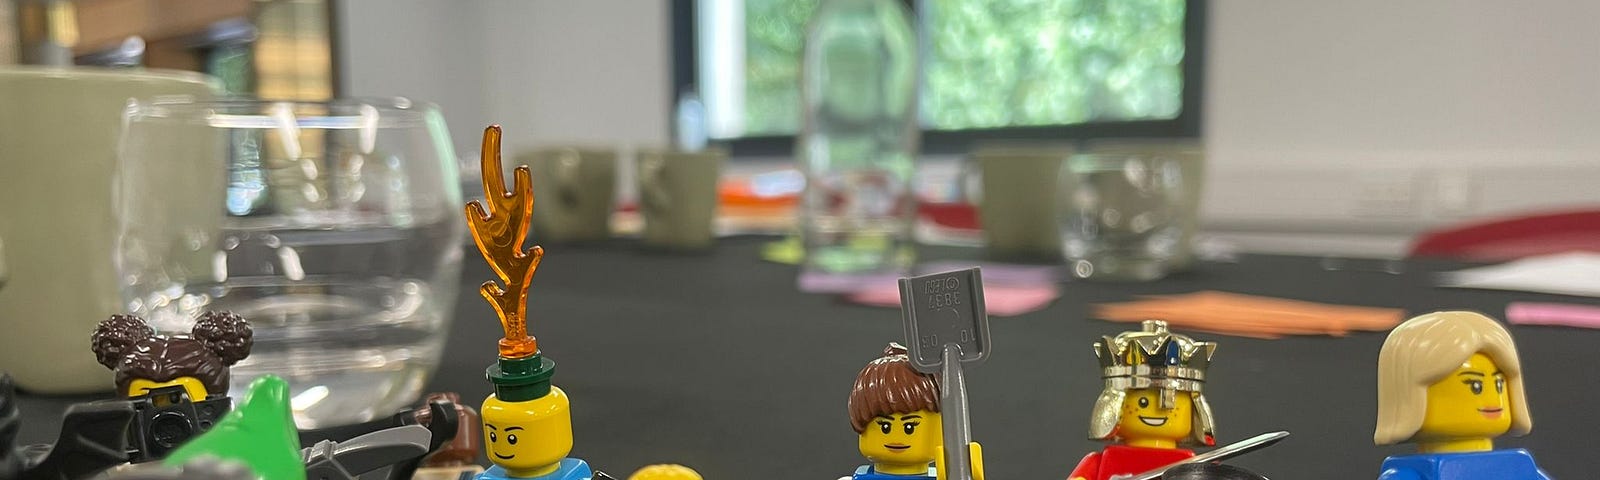 Photo shows oddly dressed lego charactors on a boardroom table in front of a sunny window.